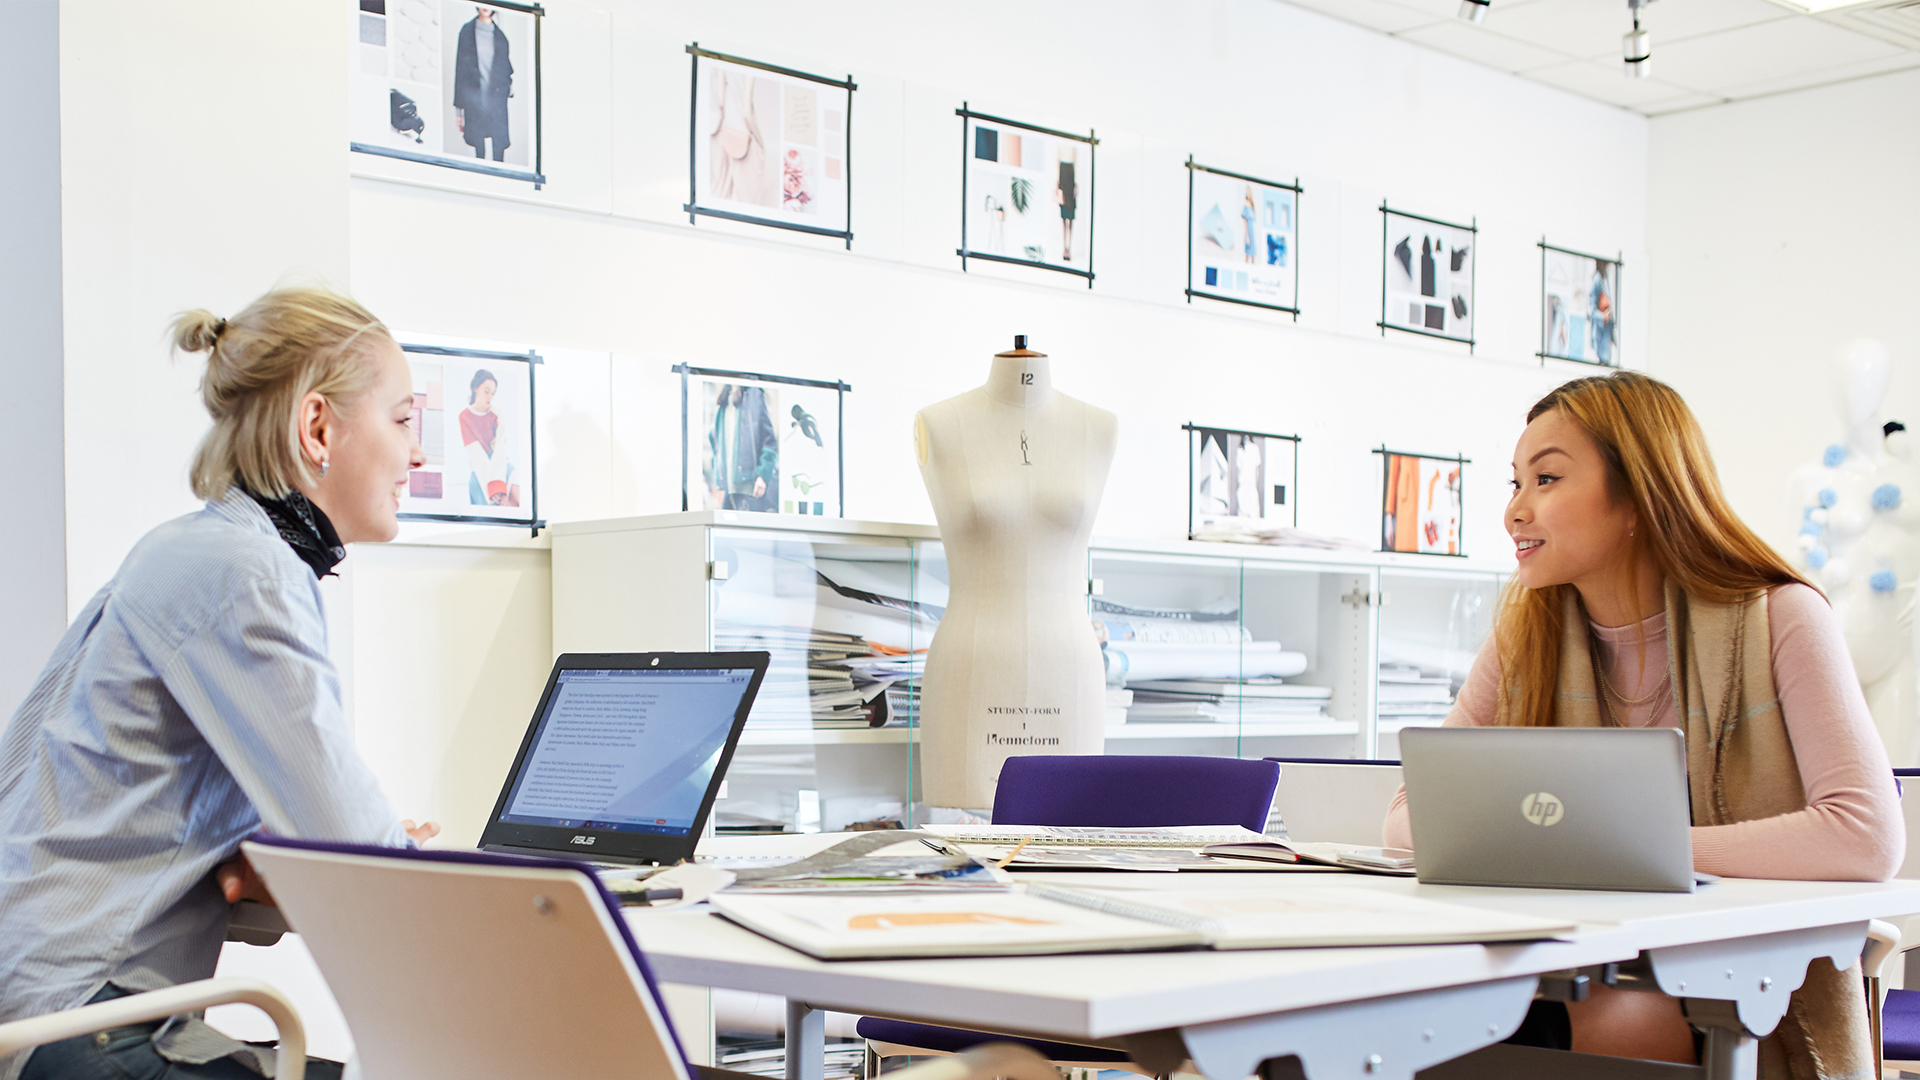 Two ladies in a fashion shop looking at designs on laptops in a bright studio